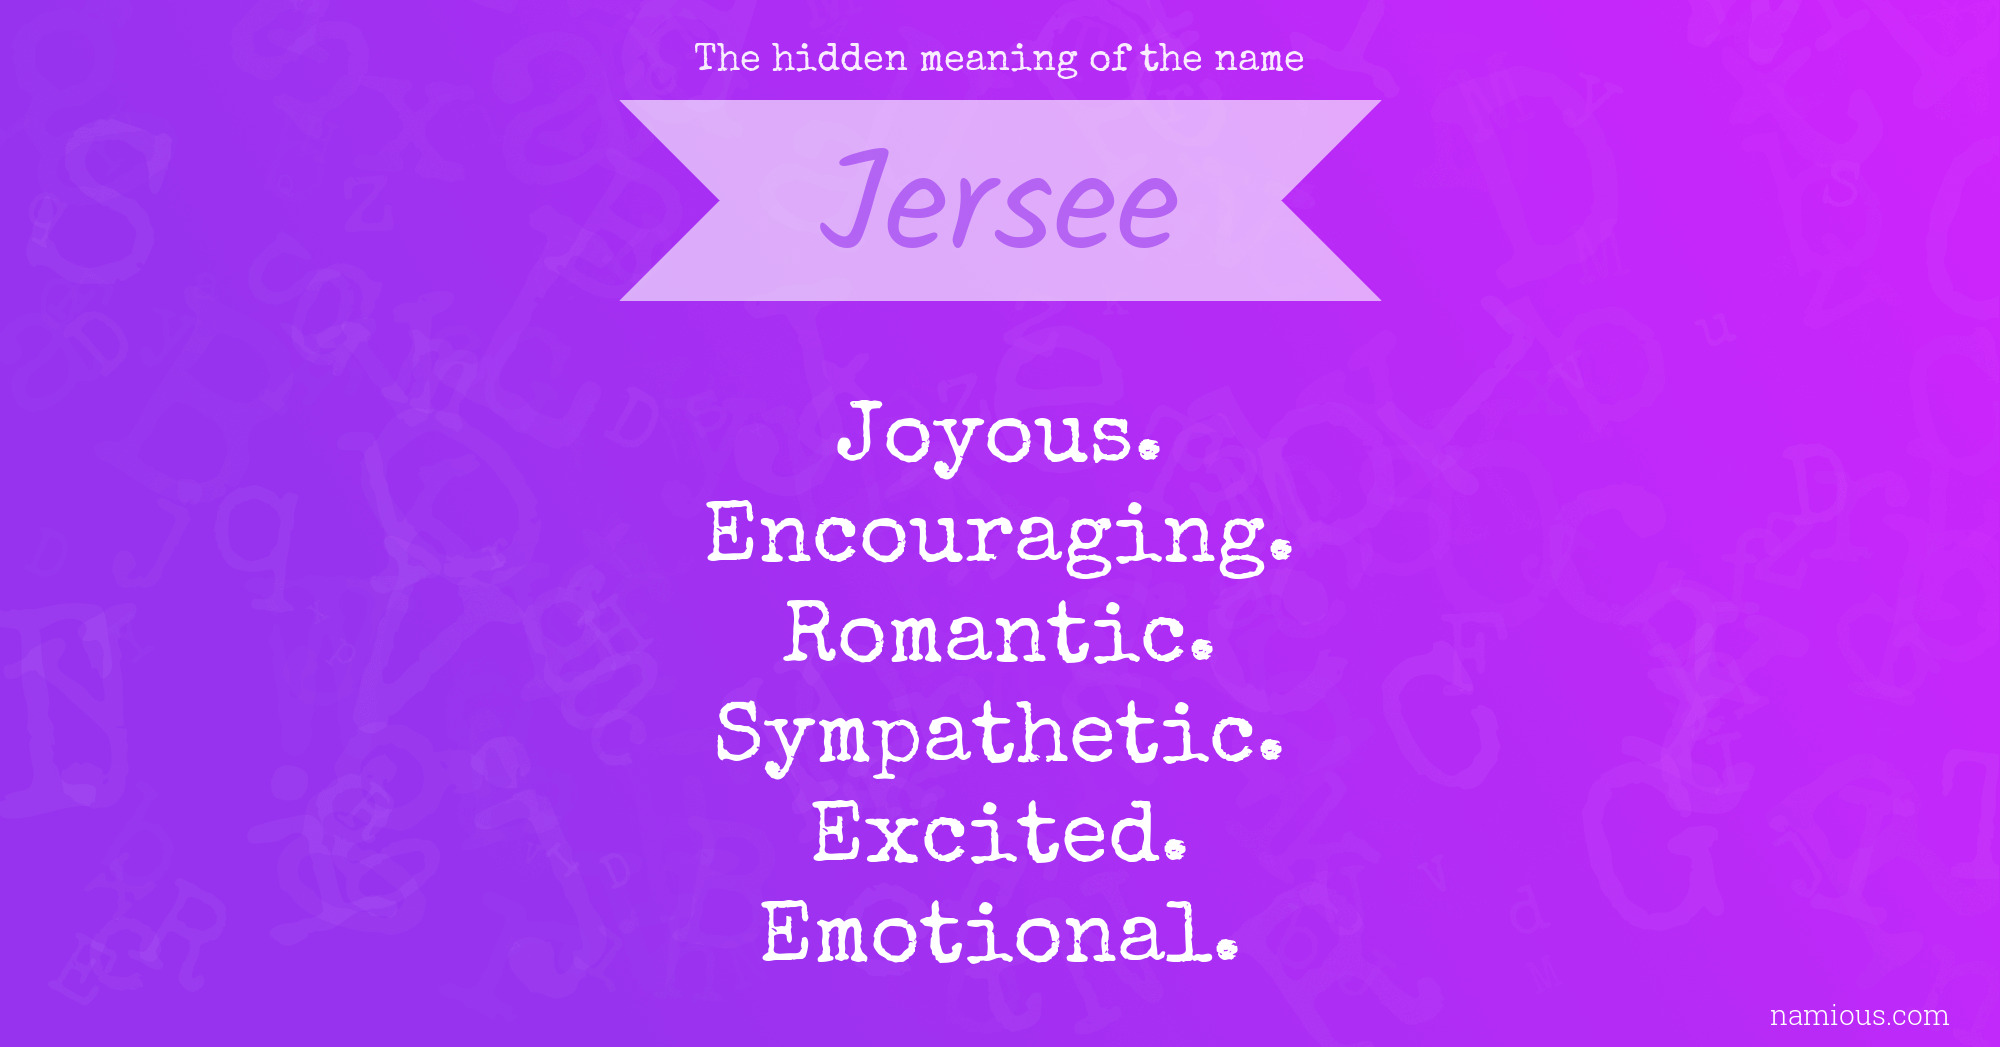 The hidden meaning of the name Jersee